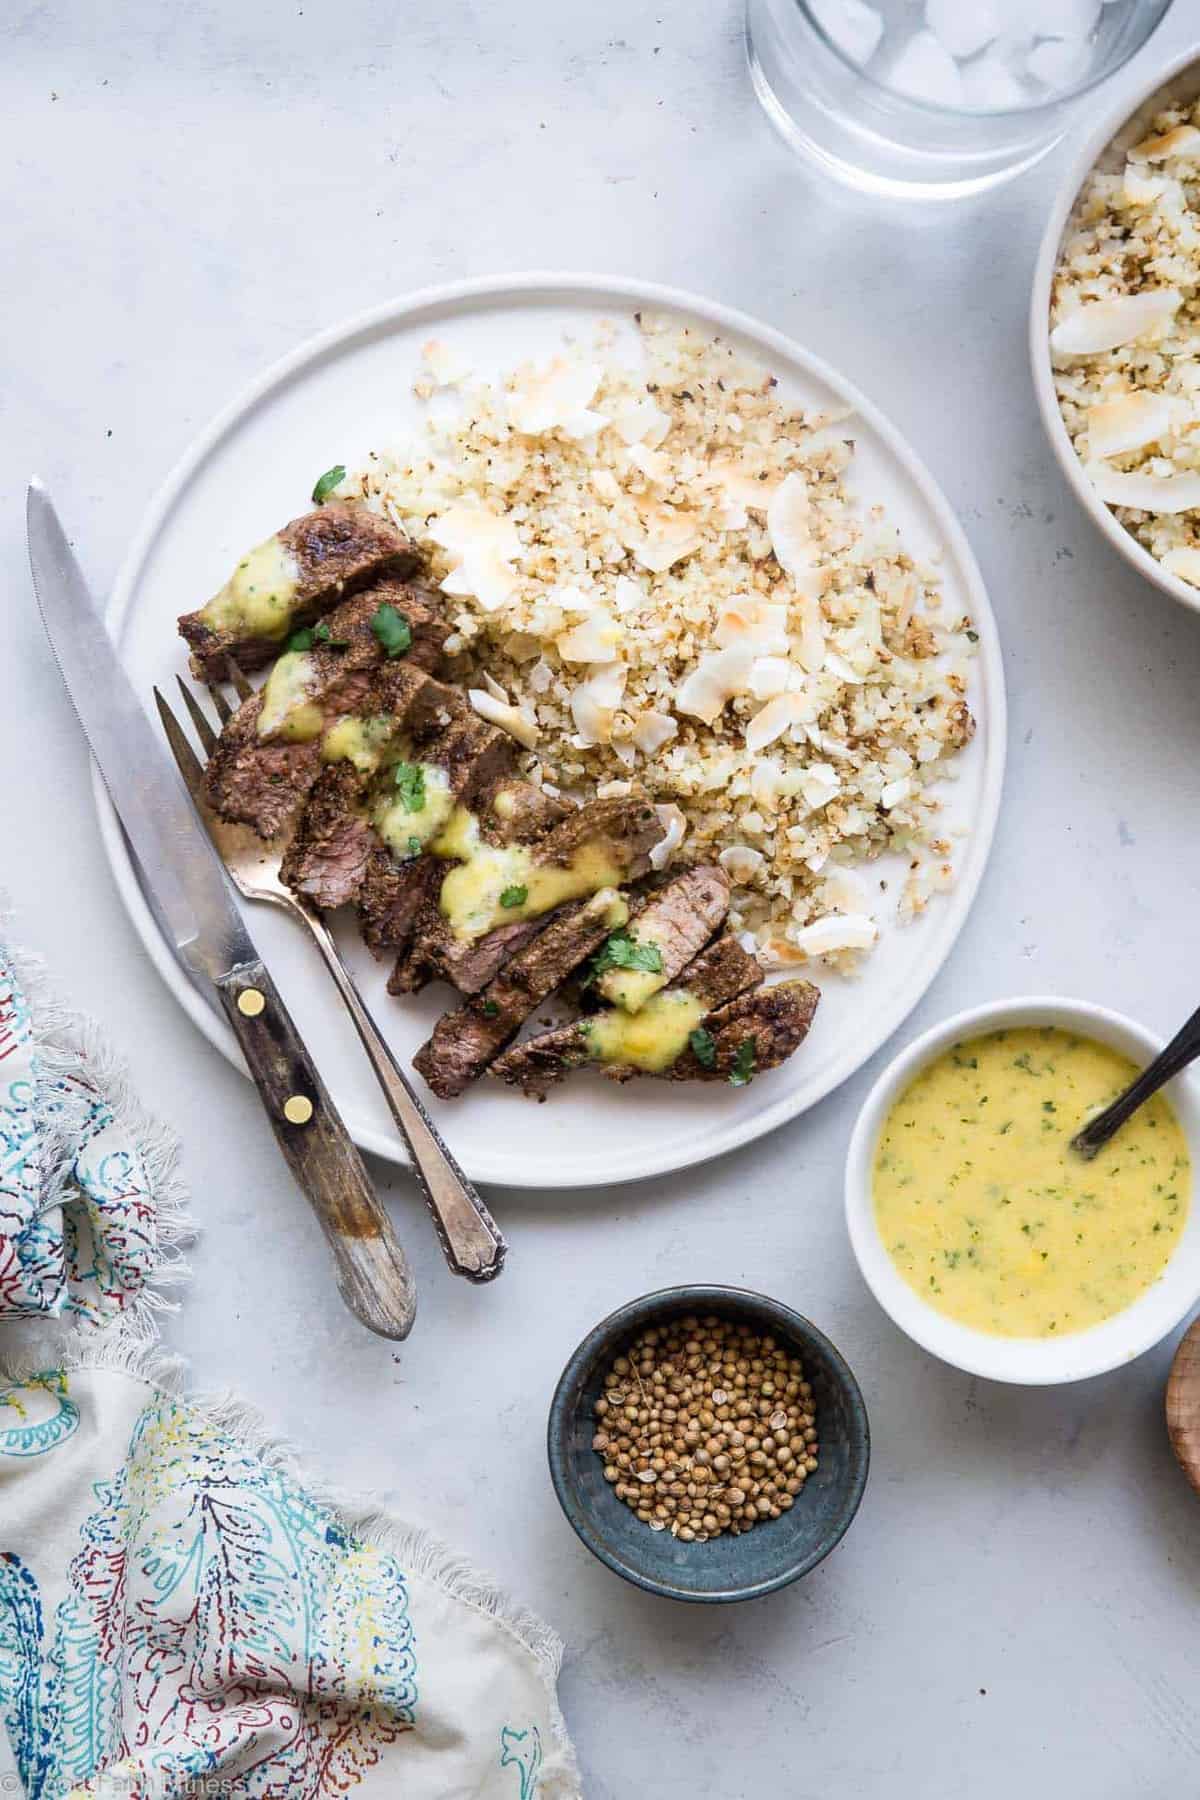 Mango Curry Steak with Coconut Cauliflower Rice - This mango curry steak is served with coconut cauliflower rice for an easy, weeknight dinner that is  under 400 calories, lower carb, gluten free and has bold, addicting flavor! | #Foodfaithfitness | 